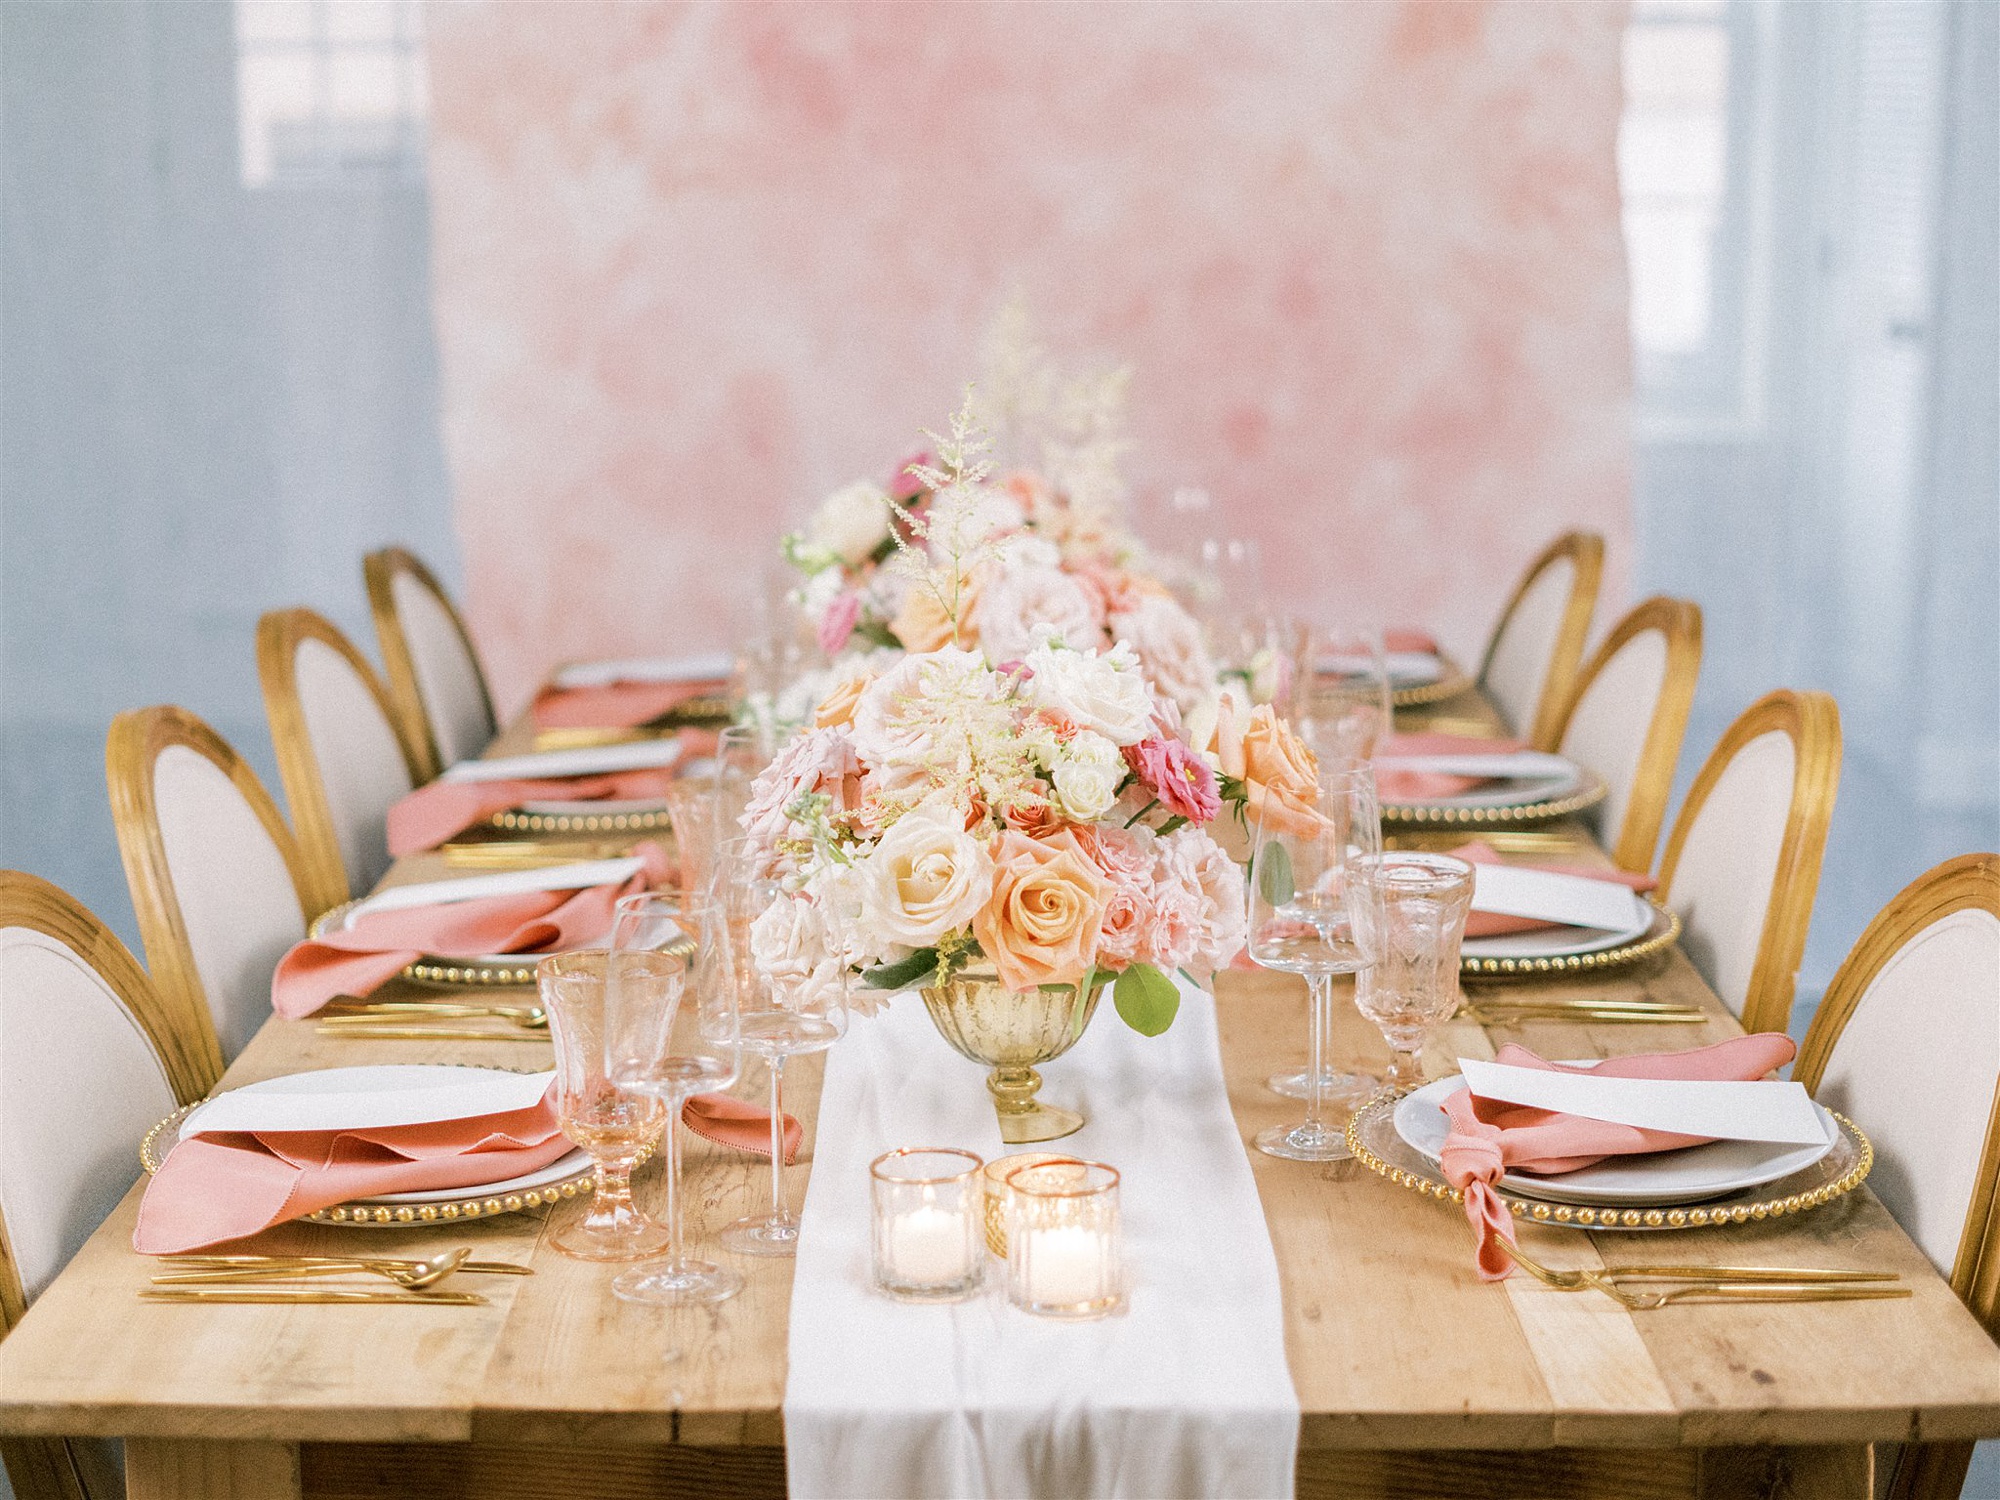 farm table details for vintage inspired wedding reception